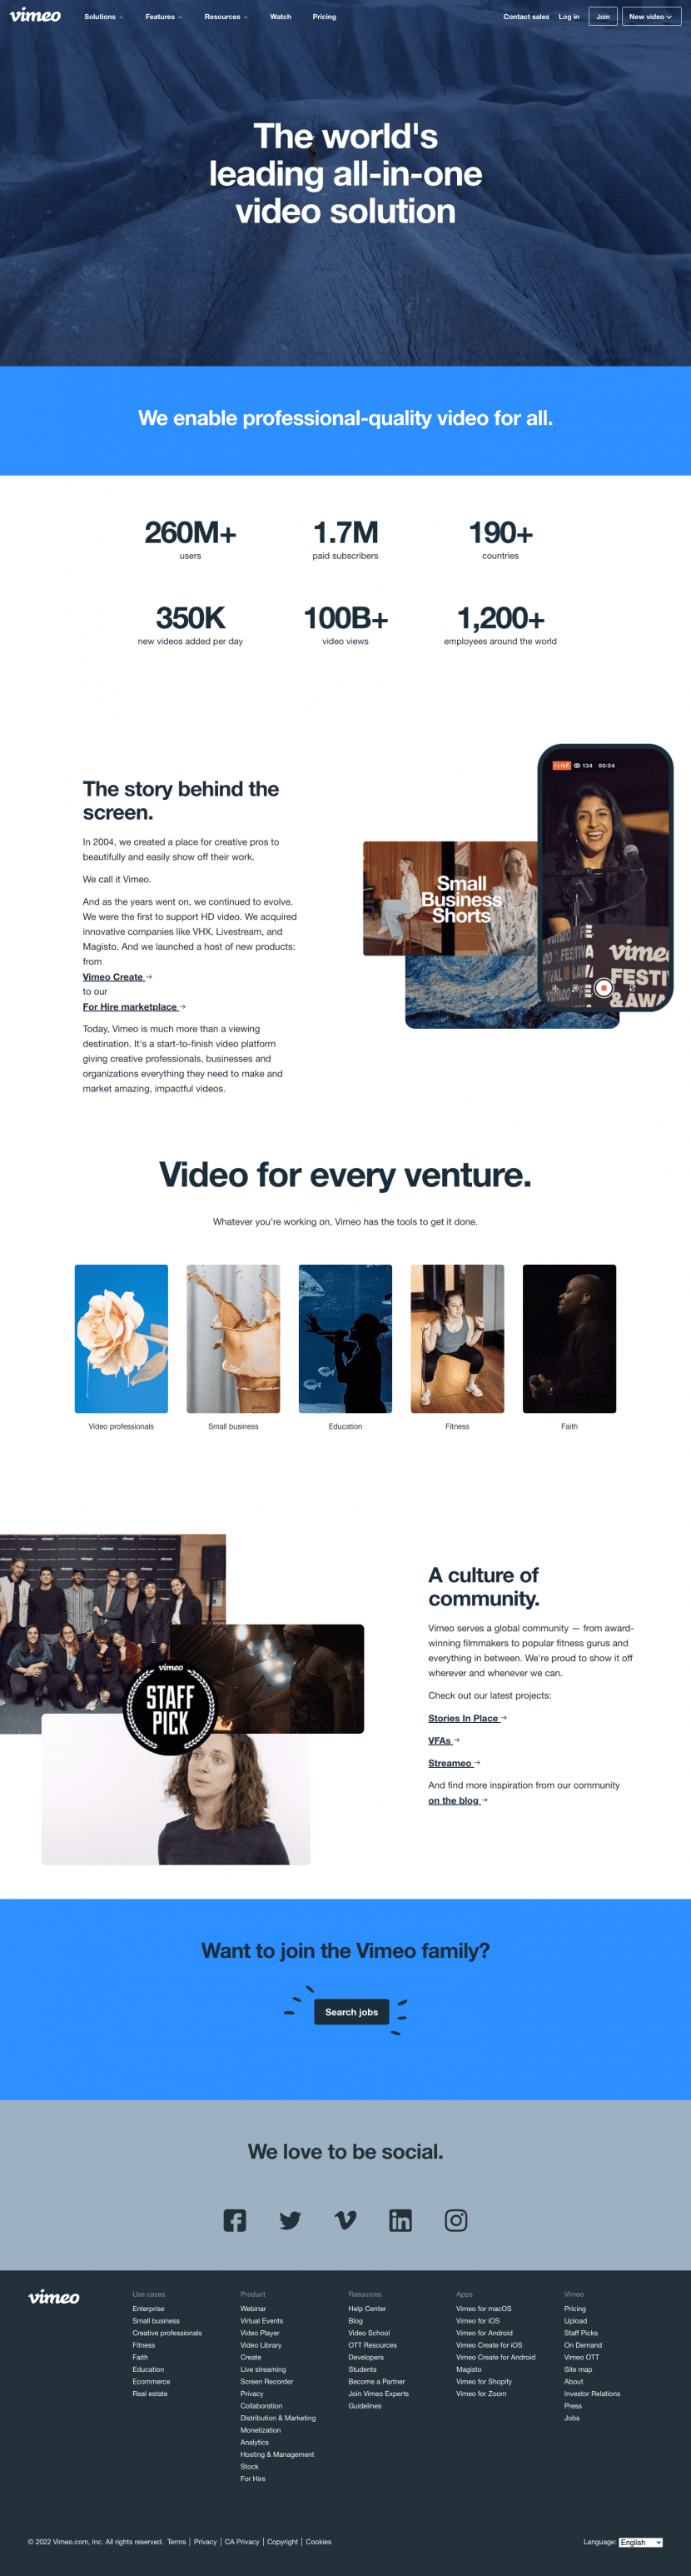 vimeo-about-us-page